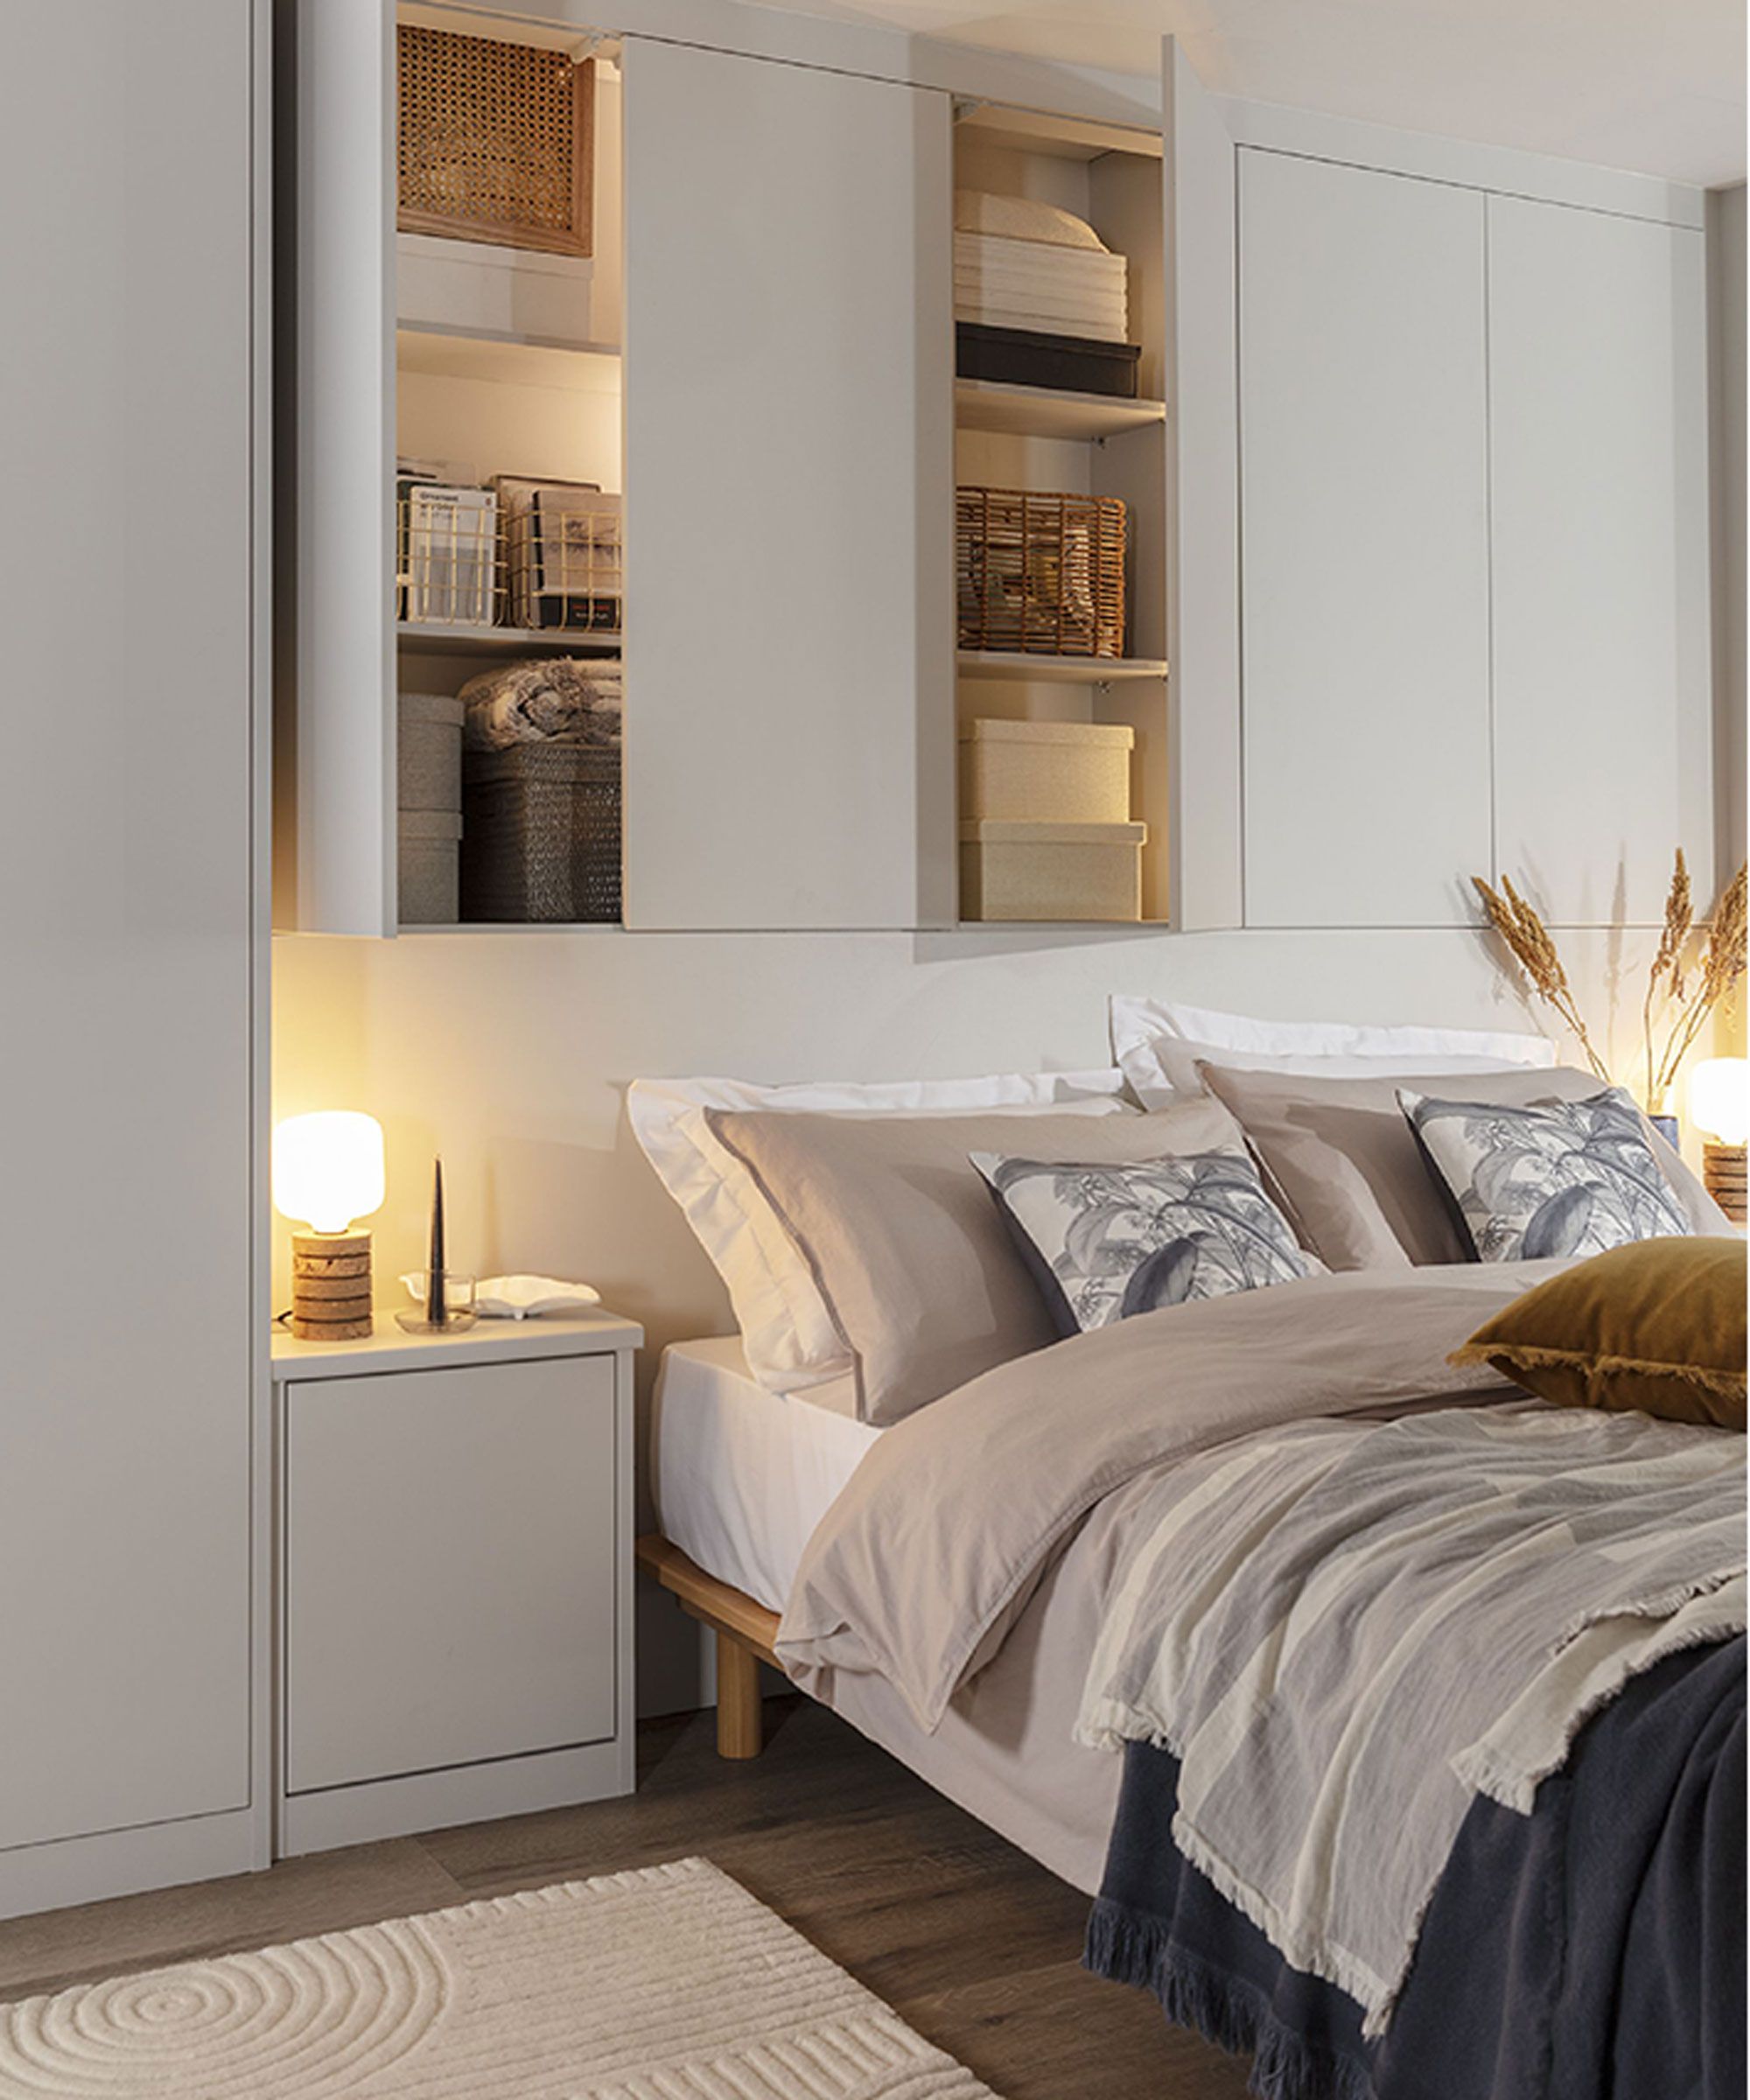 Overbed Storage Ideas – Ways To Boost Bedroom Stash Space | Pertaining To Overbed Wardrobes (View 12 of 15)